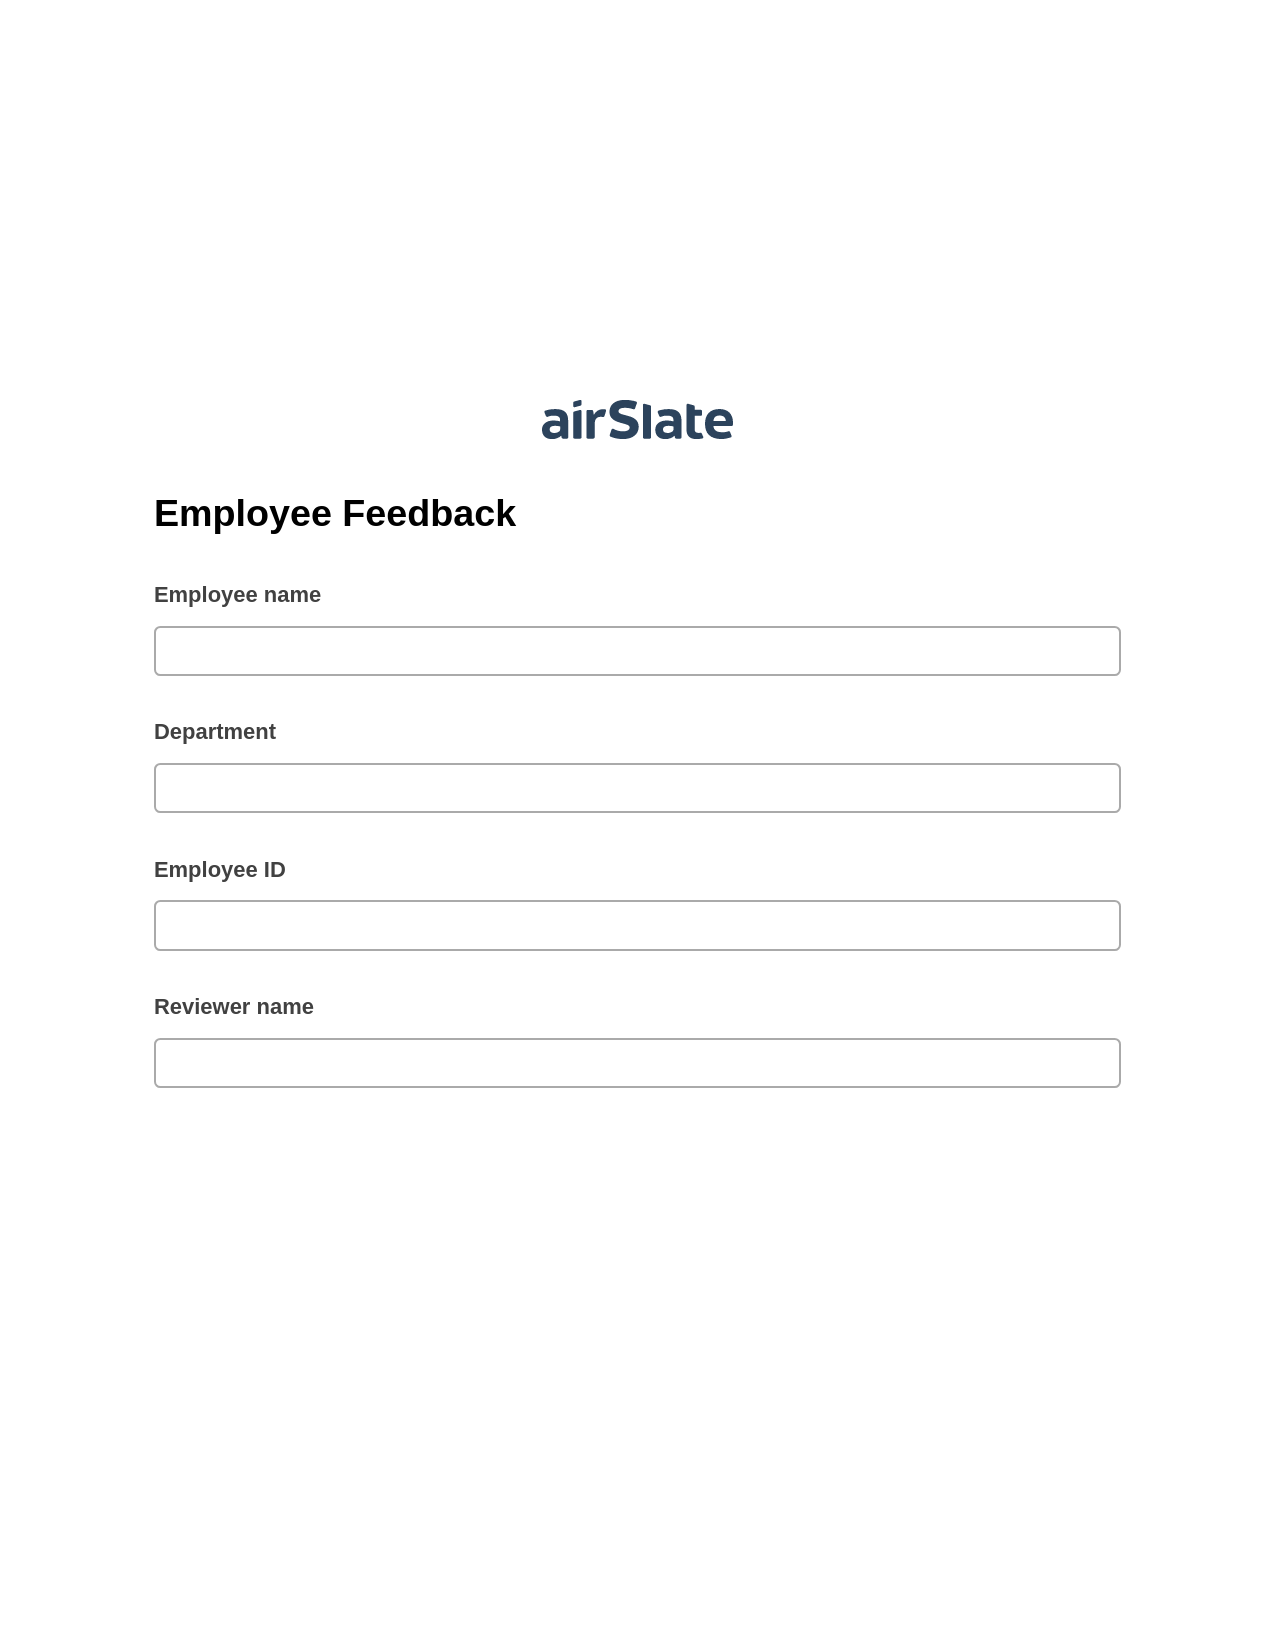 Multirole Employee Feedback Pre-fill from Google Sheet Dropdown Options Bot, Assign Roles to Recipients Bot, Slack Notification Postfinish Bot